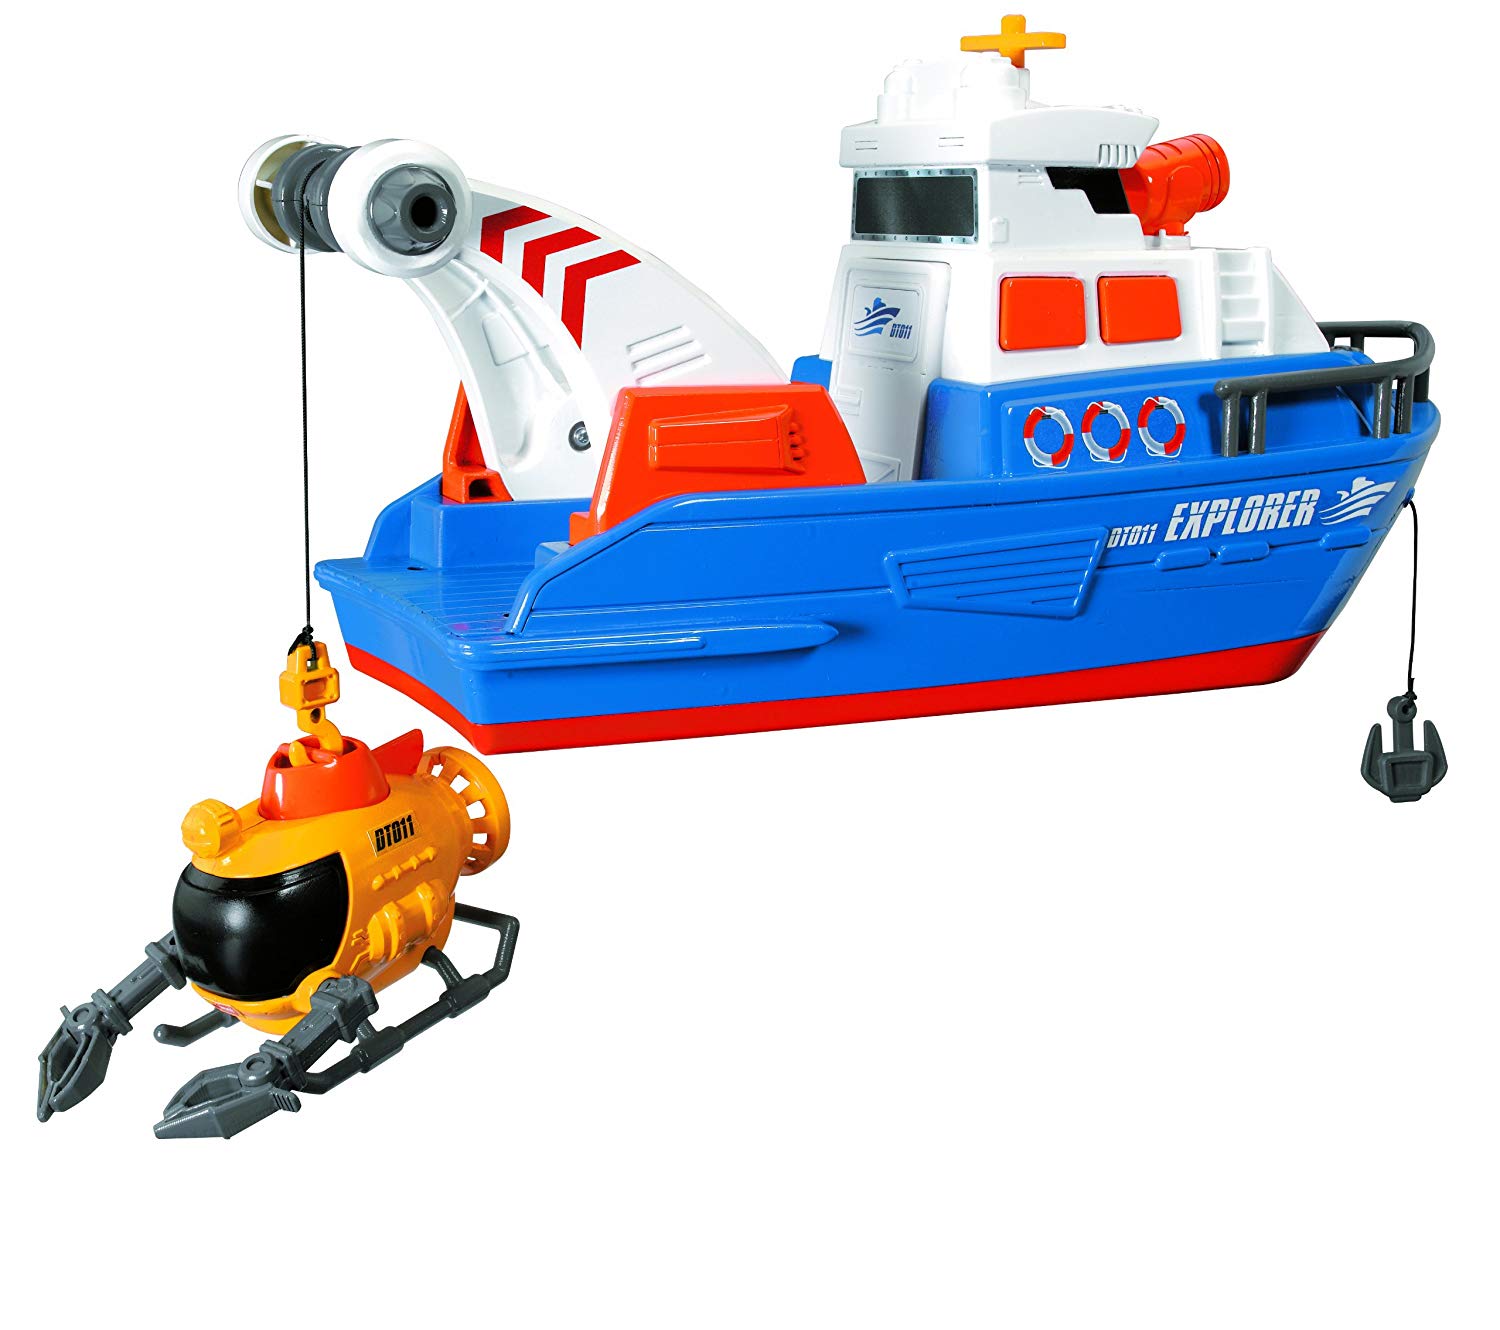 Dickie Toys Action Series 203308361 Explorer Boat Boat With Submarine, 33 c